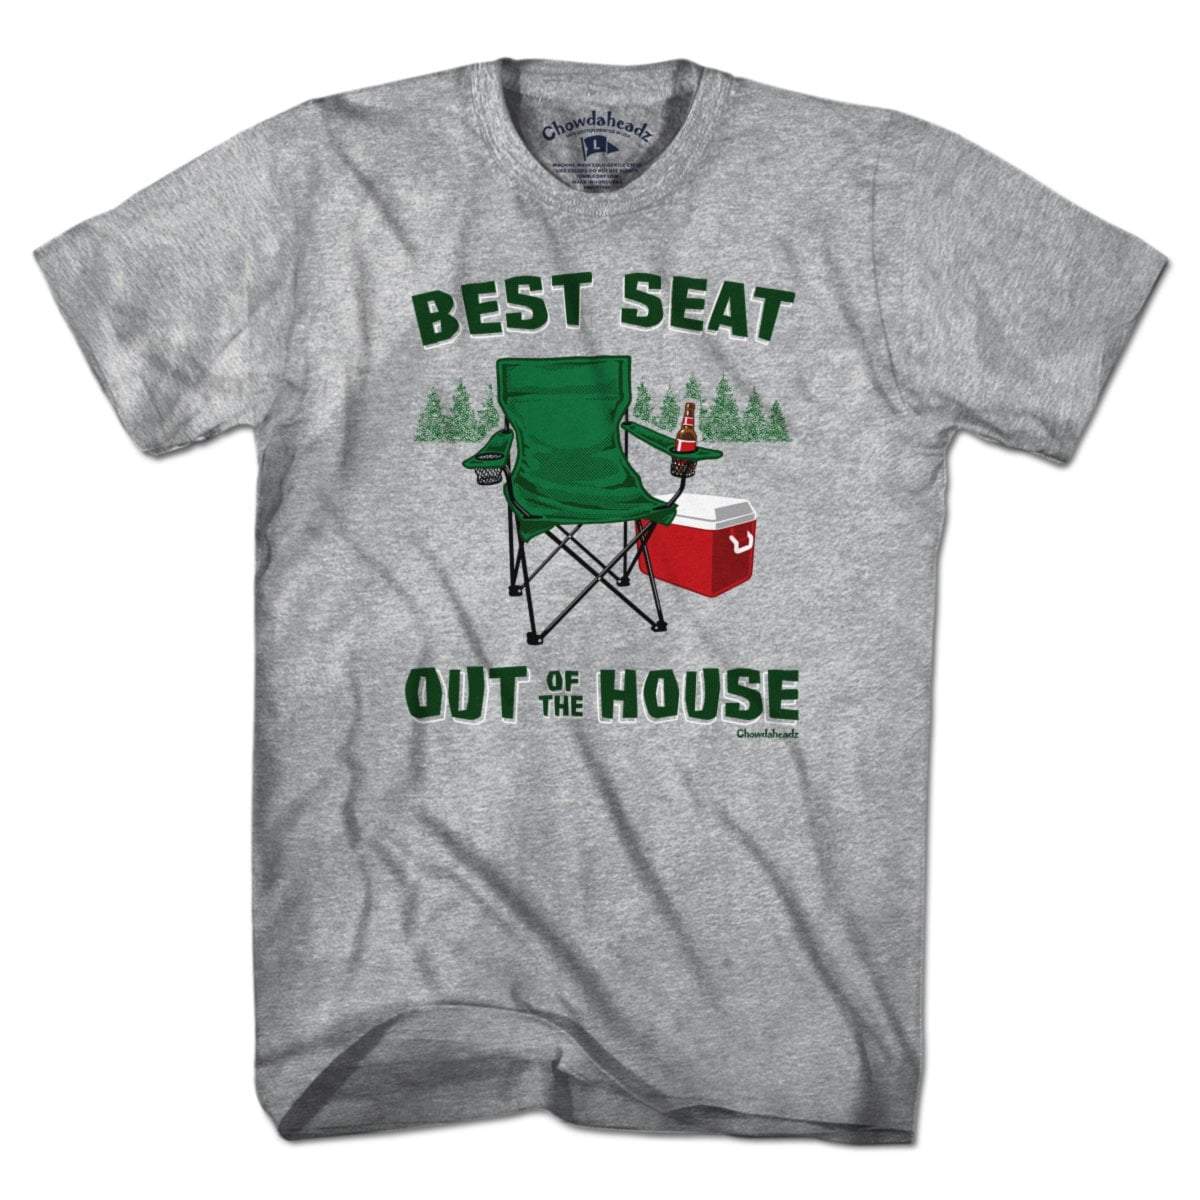 Best Seat Out of the House T-Shirt - Chowdaheadz